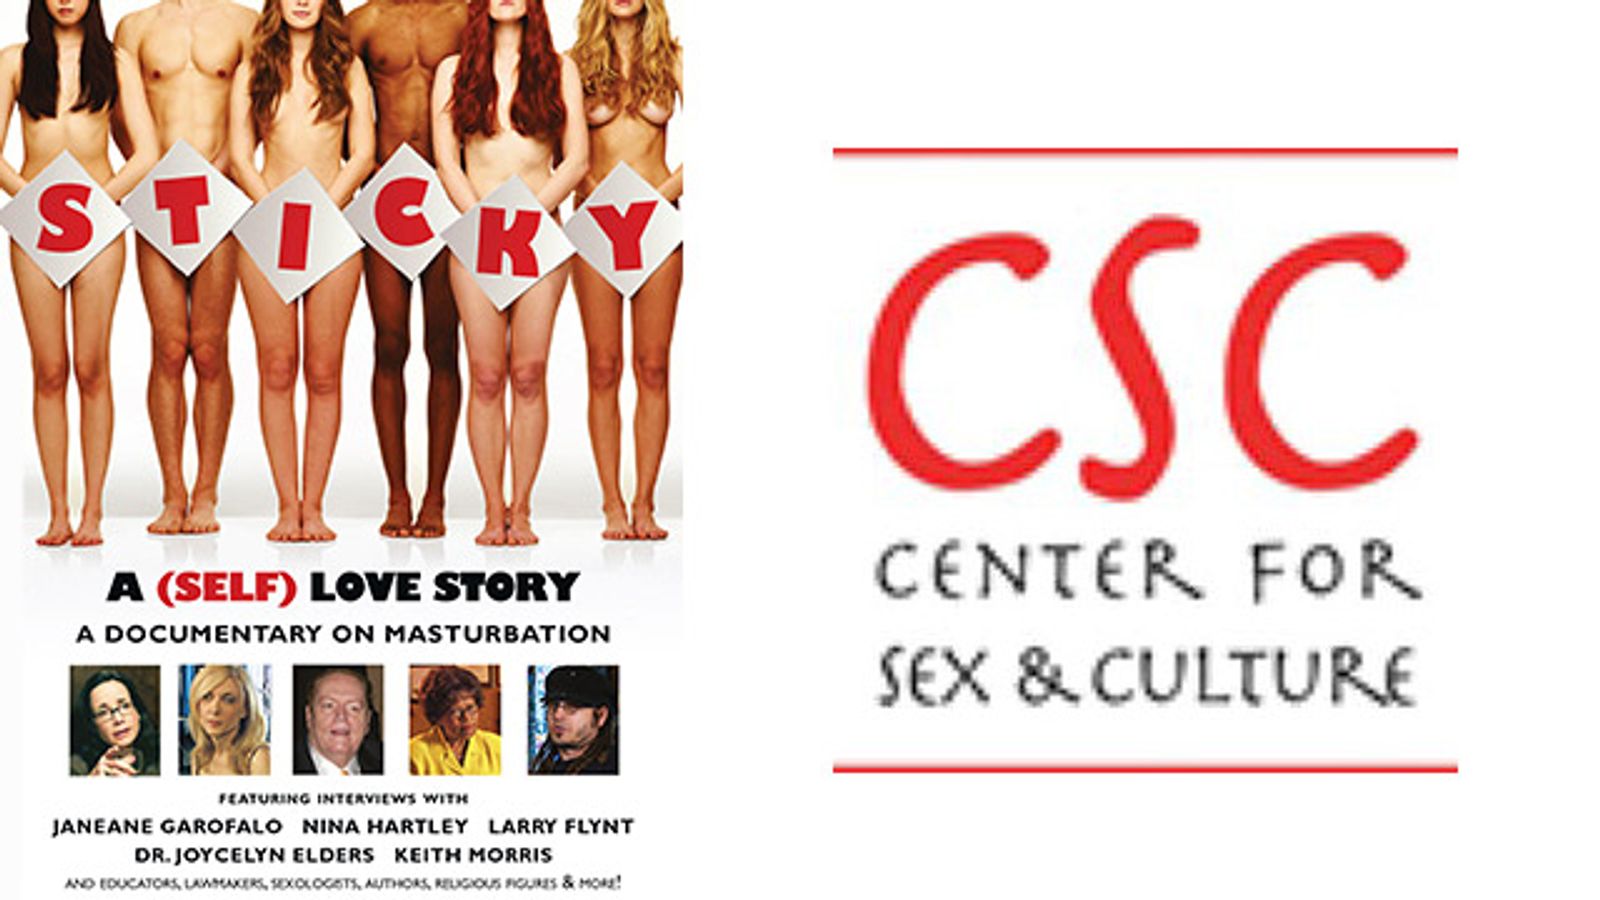 Center For Sex & Culture Brings An In-Depth Look To Self-Pleasuring